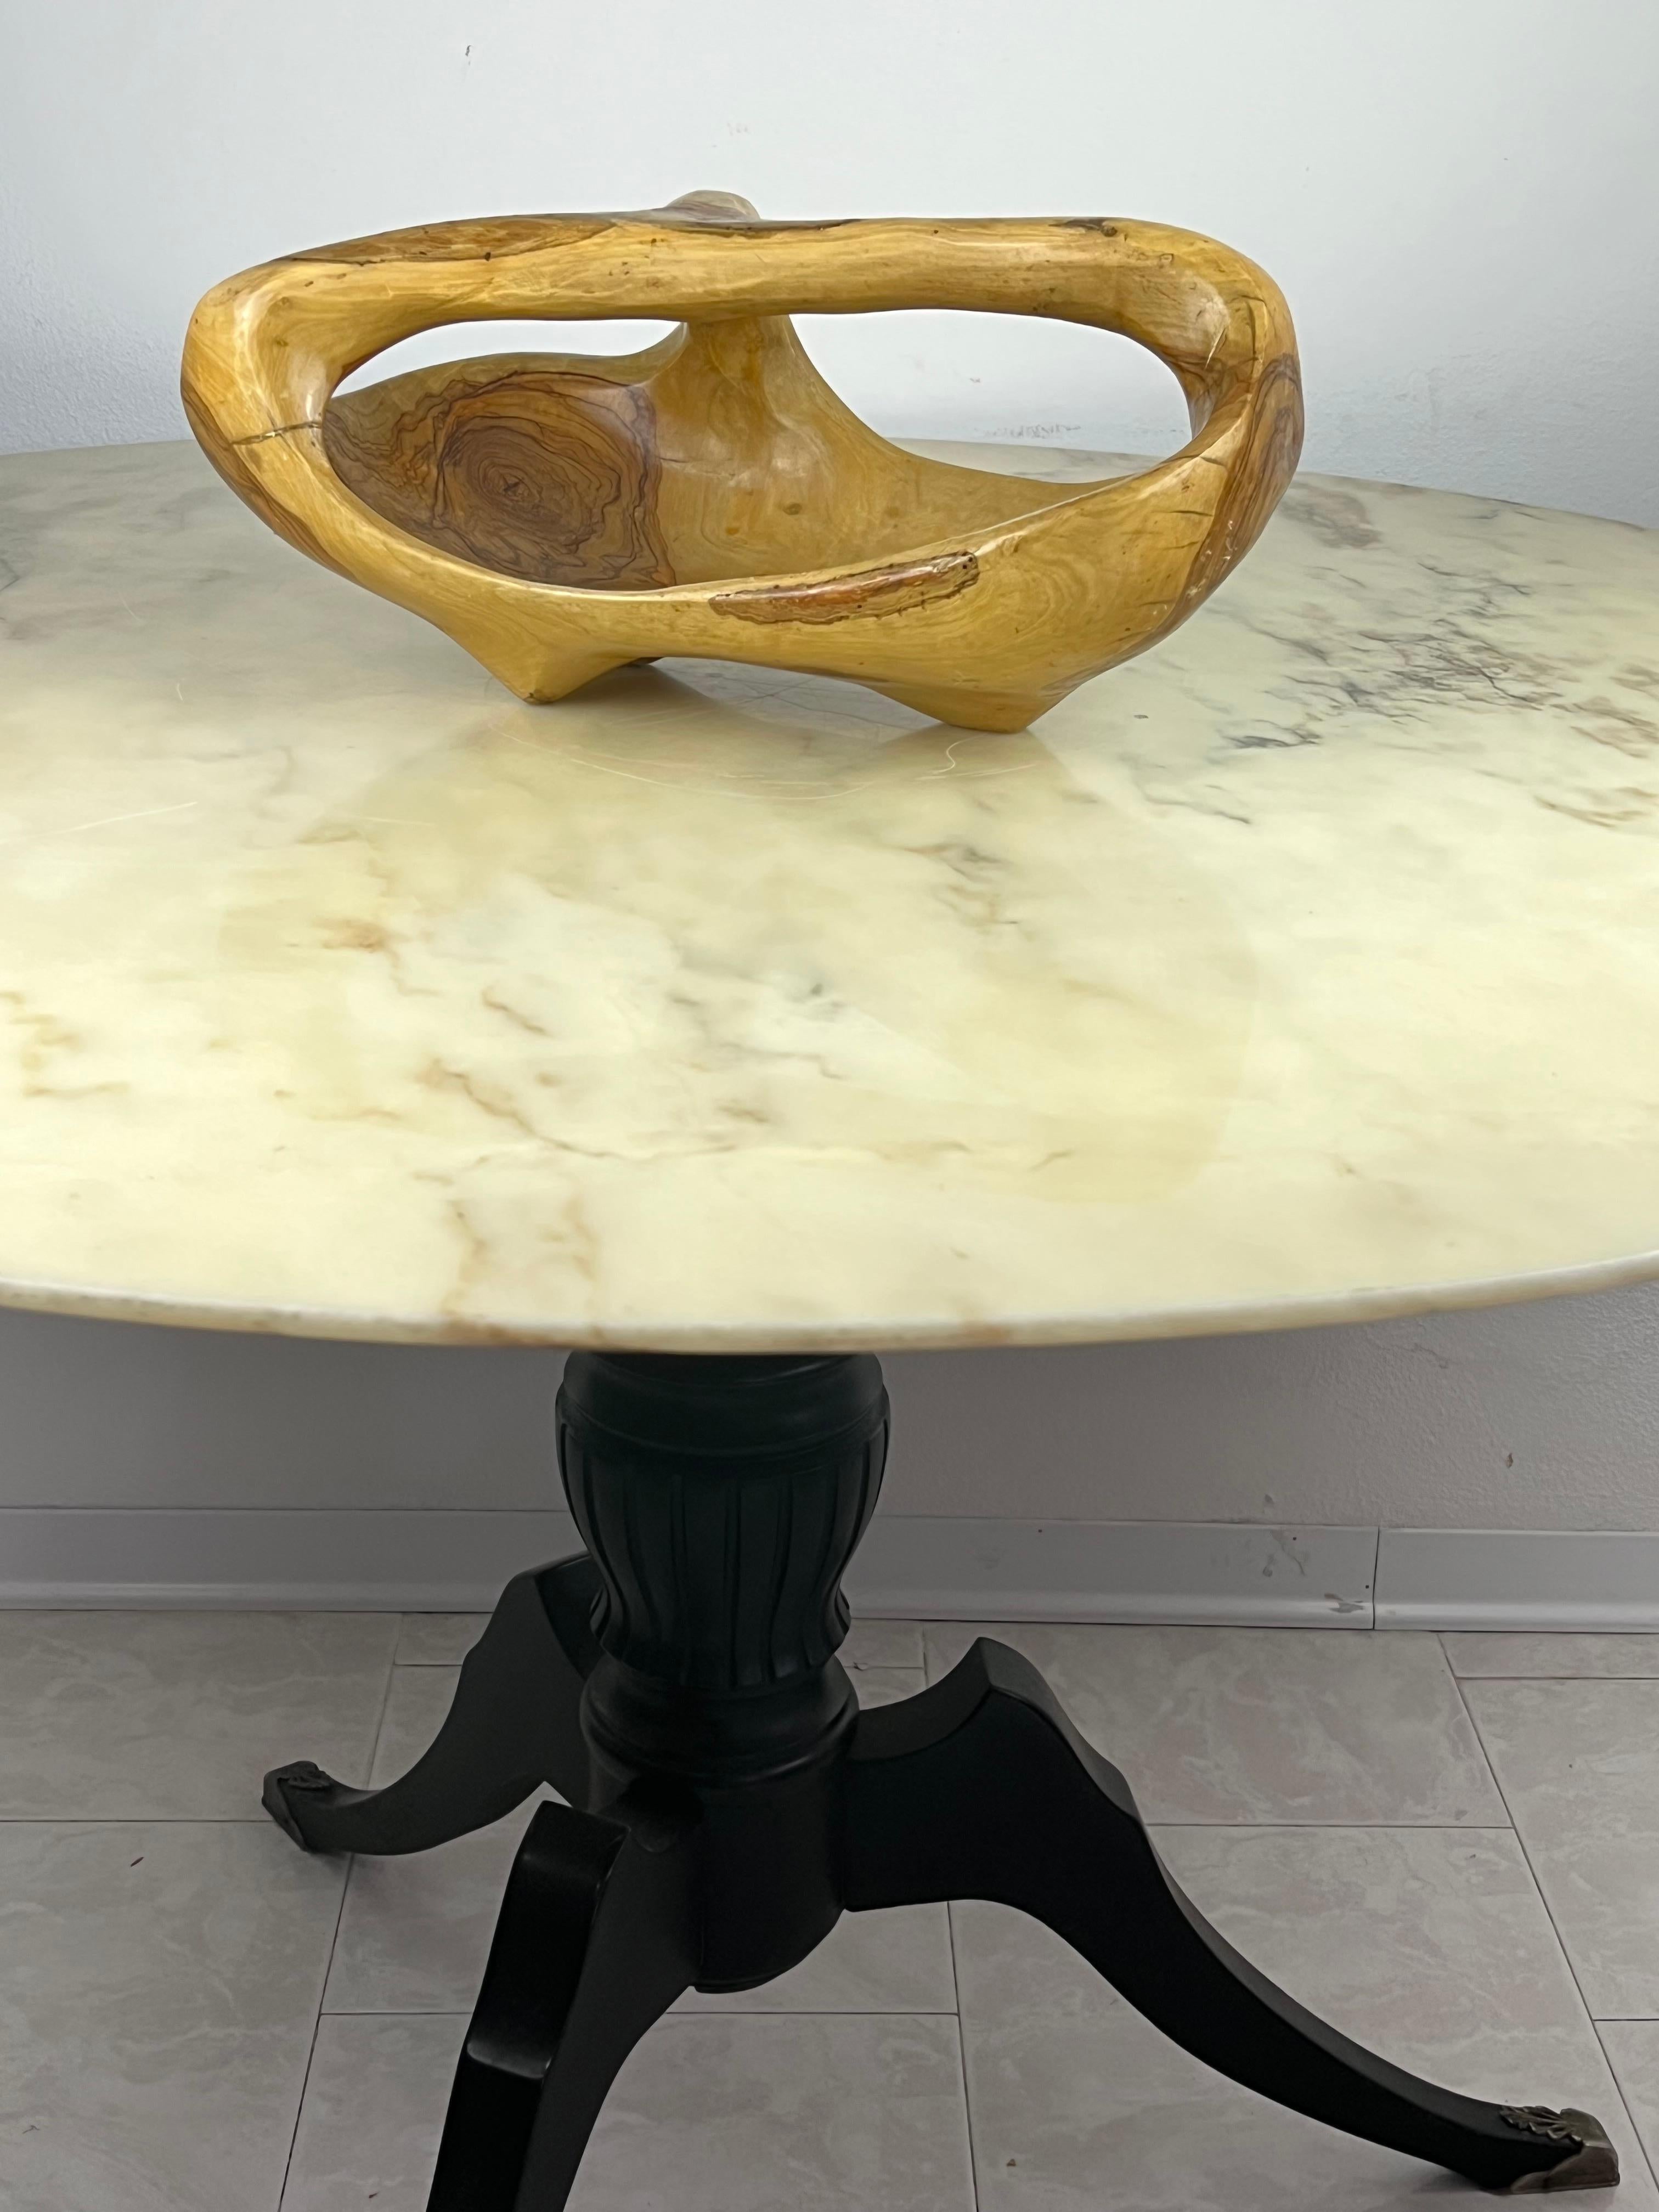 Olive wood centrepiece, Italy, 1960s
Found in the apartment of a well-known interior designer in my city. Intact, good condition, small signs of aging.